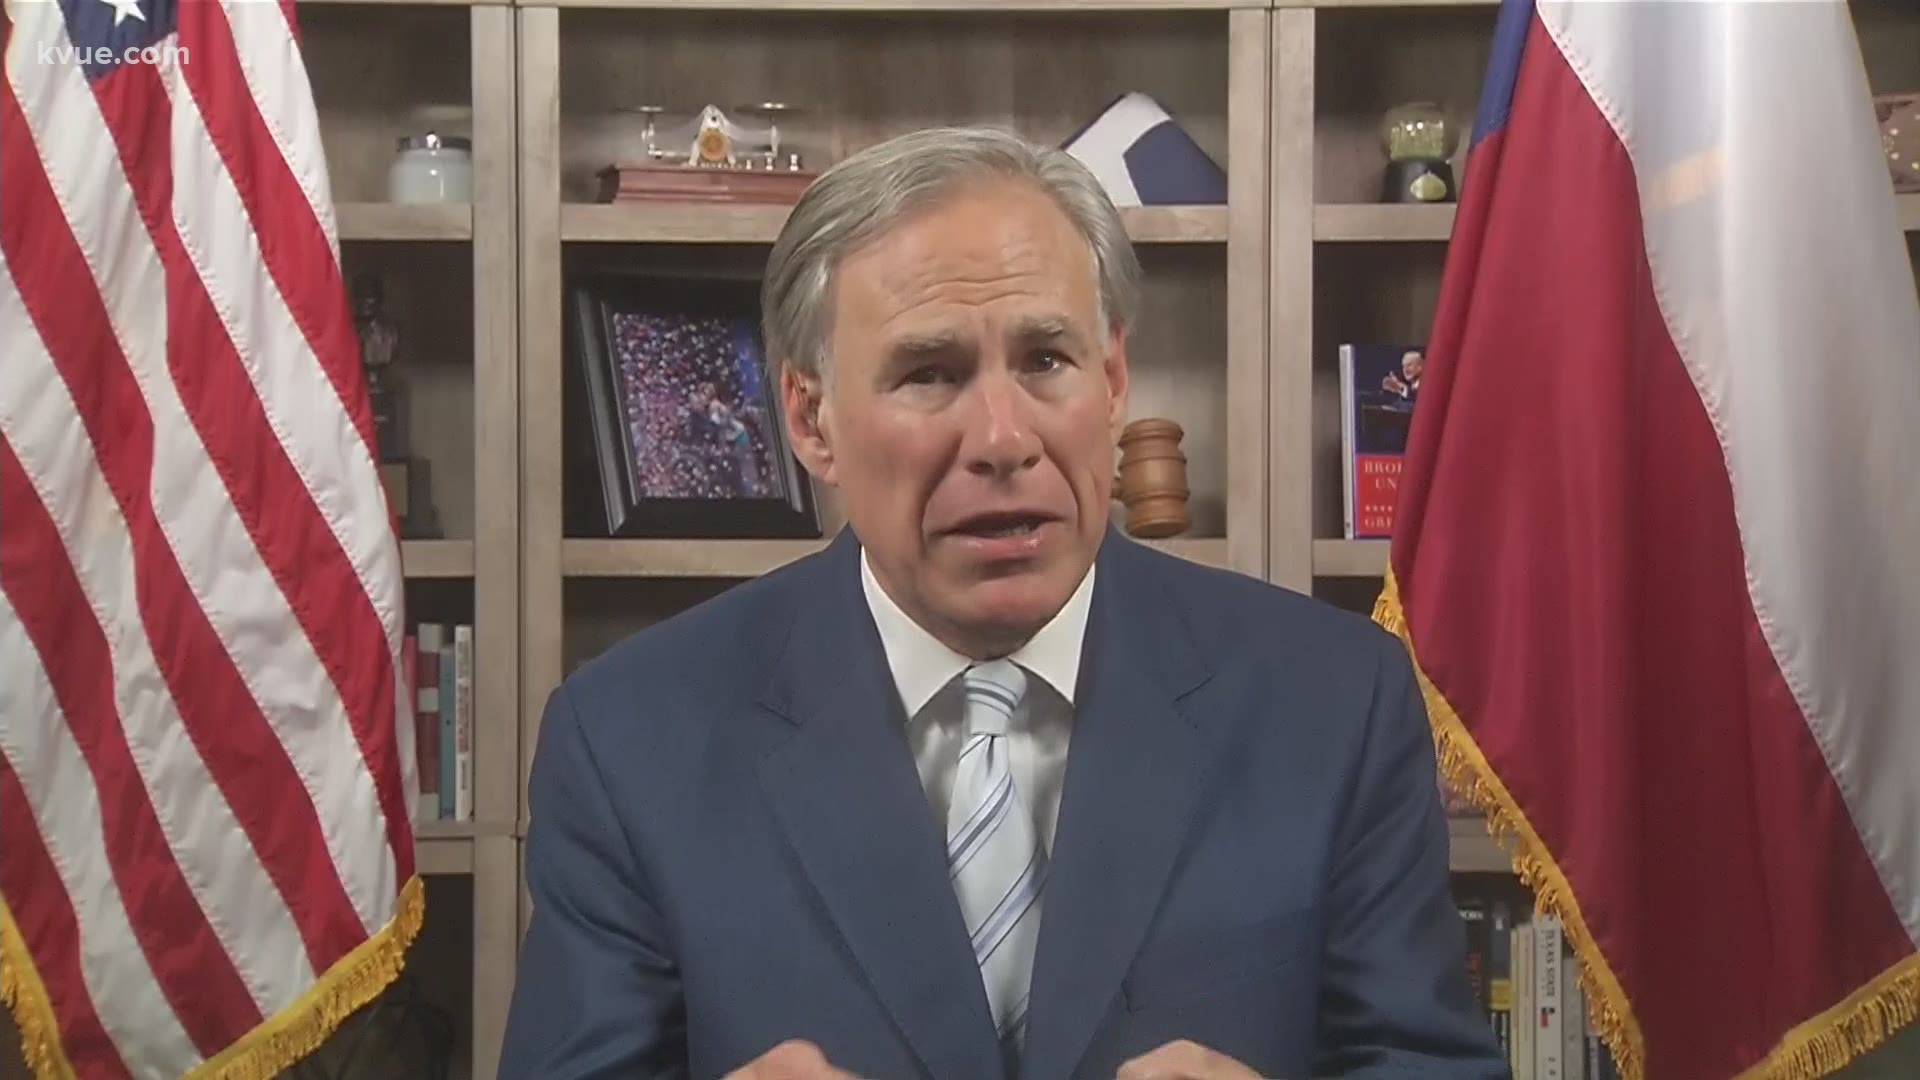 Gov. Greg Abbott joined KVUE live Monday as Democrats fled to Washington, D.C., amid the special session.